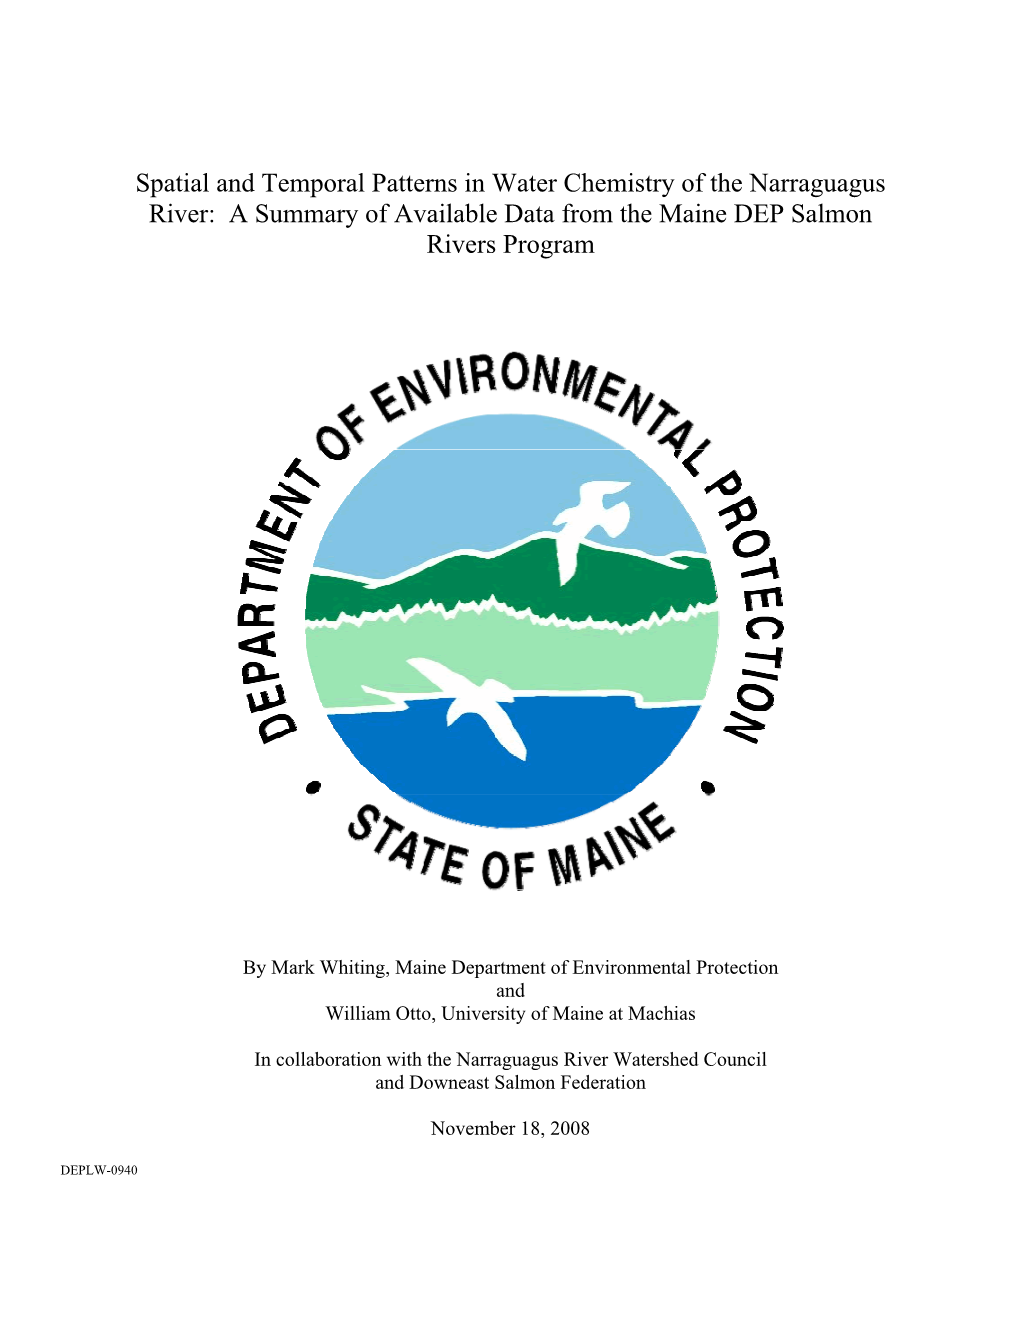 Water Chemistry of the Narraguagus River: a Summary of Available Data from the Maine DEP Salmon Rivers Program